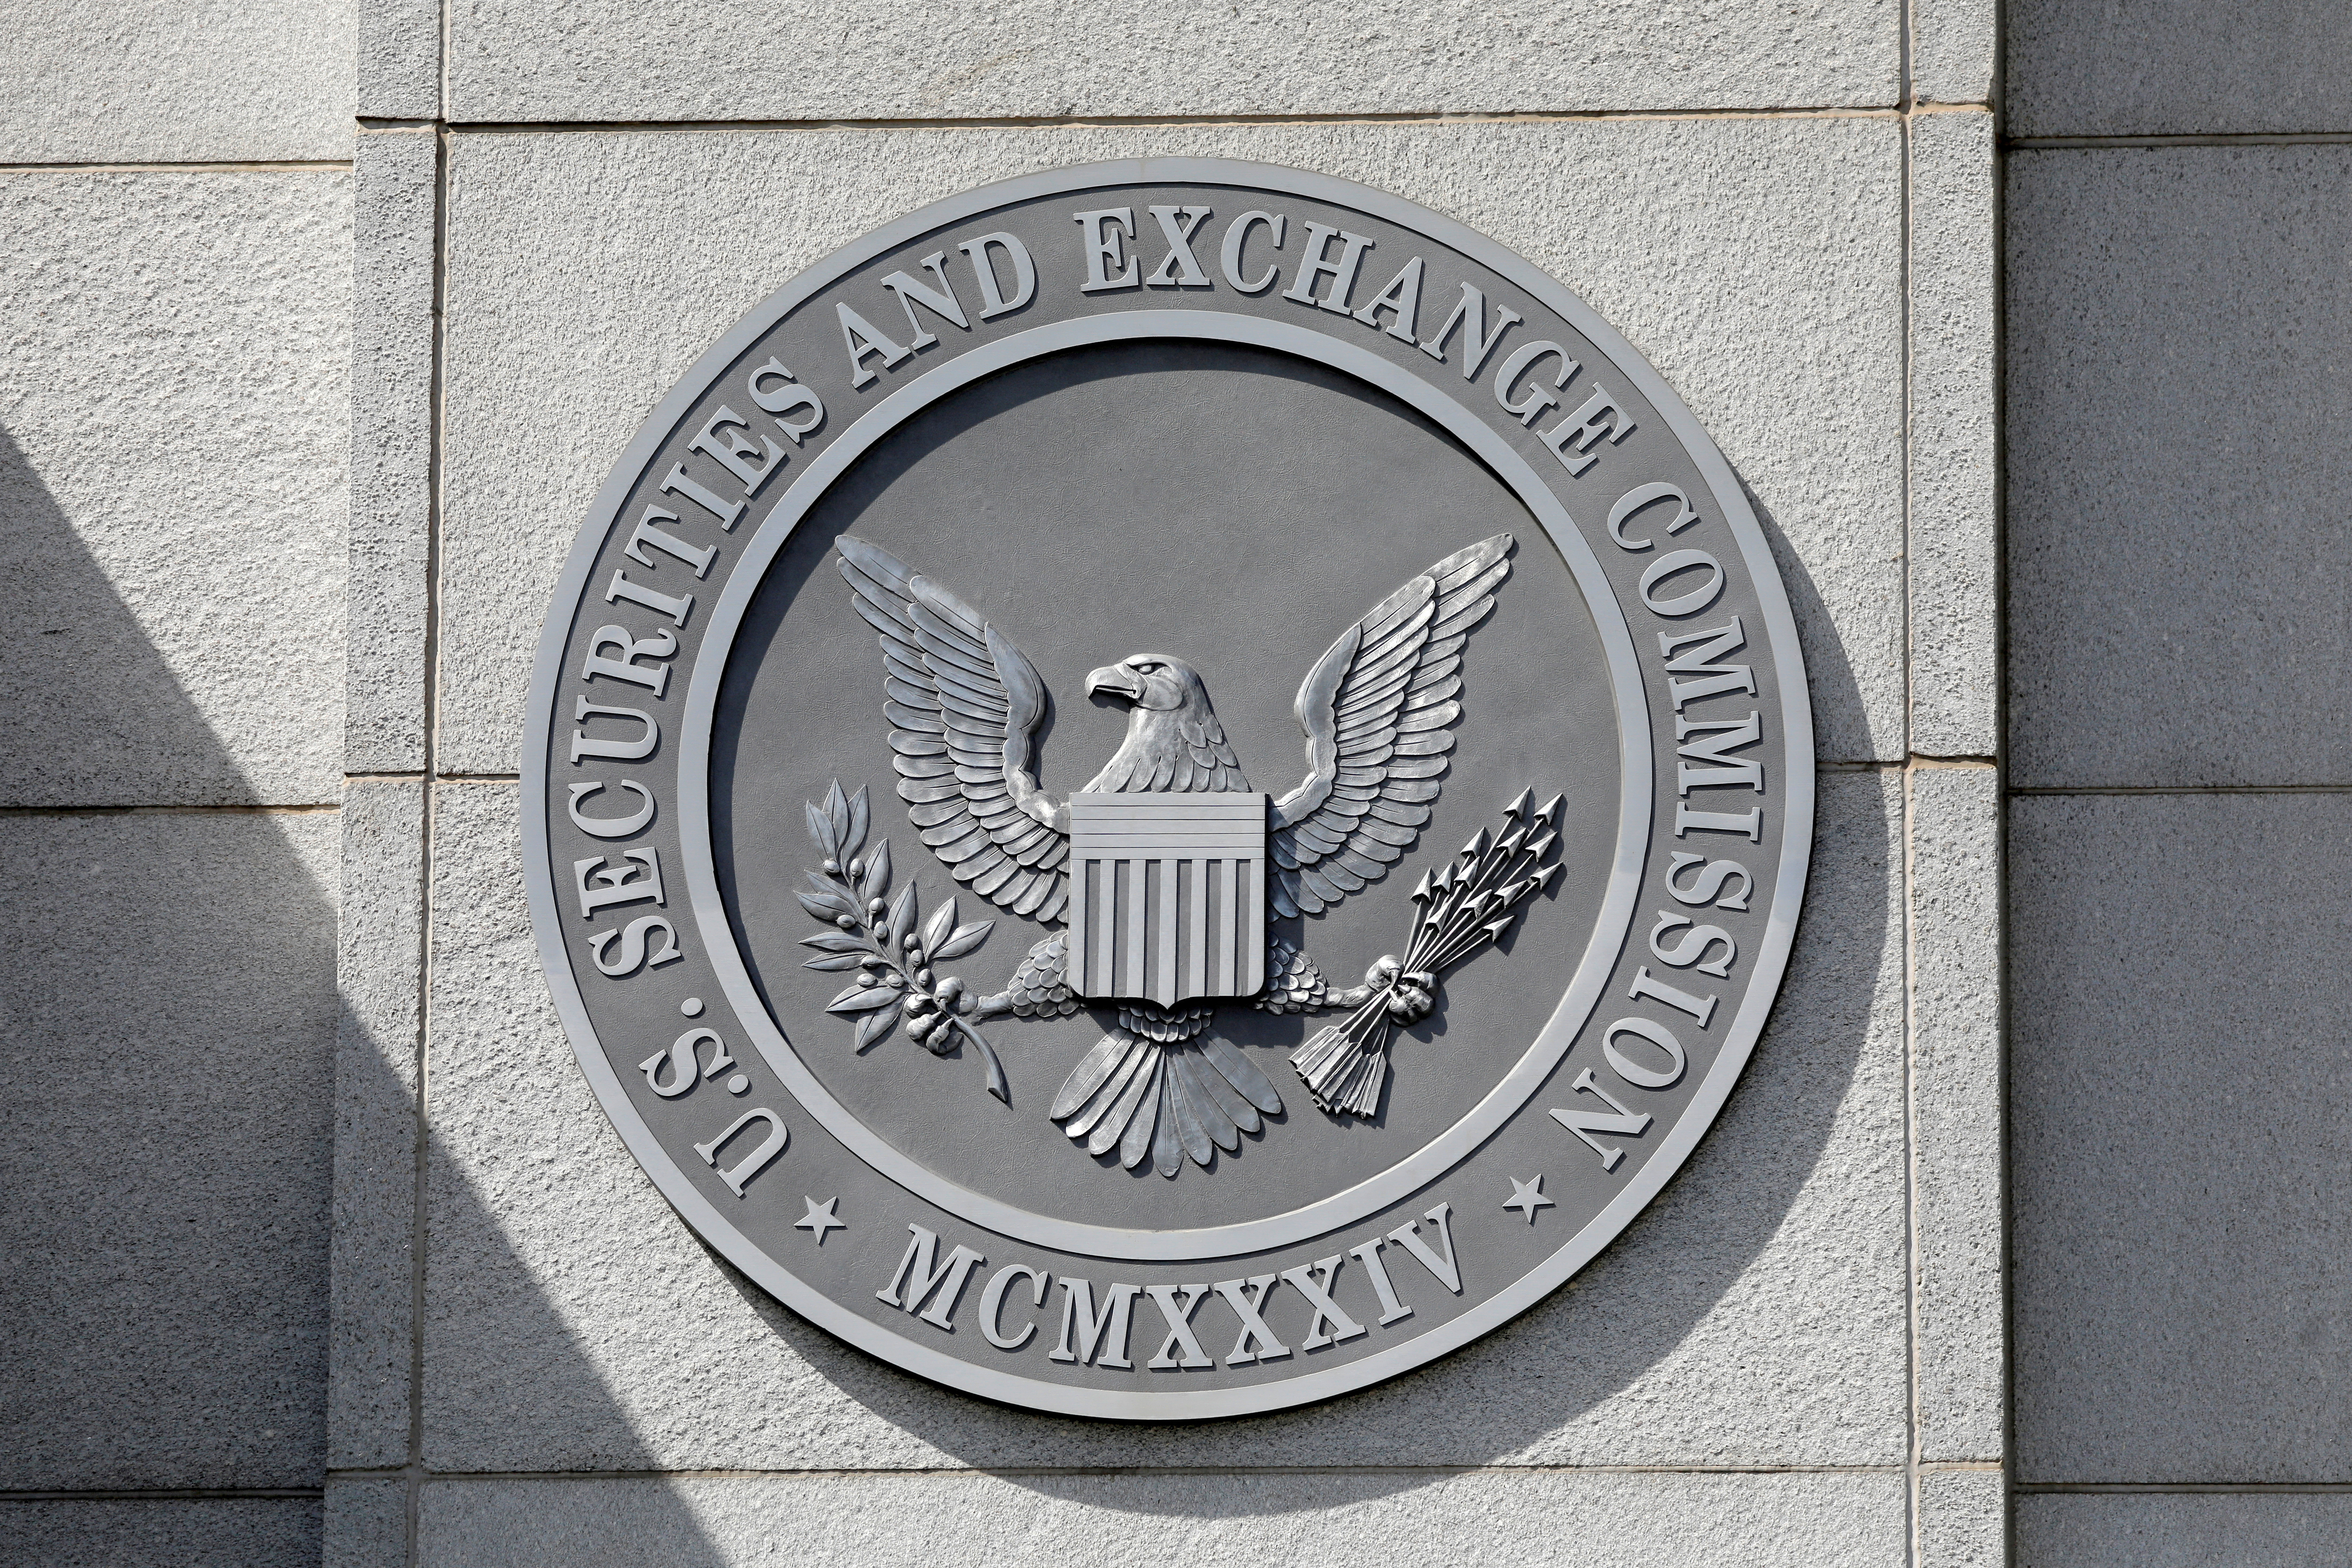 The seal of the U.S. Securities and Exchange Commission (SEC) is seen at their headquarters in Washington, D.C., U.S., May 12, 2021. REUTERS/Andrew Kelly/